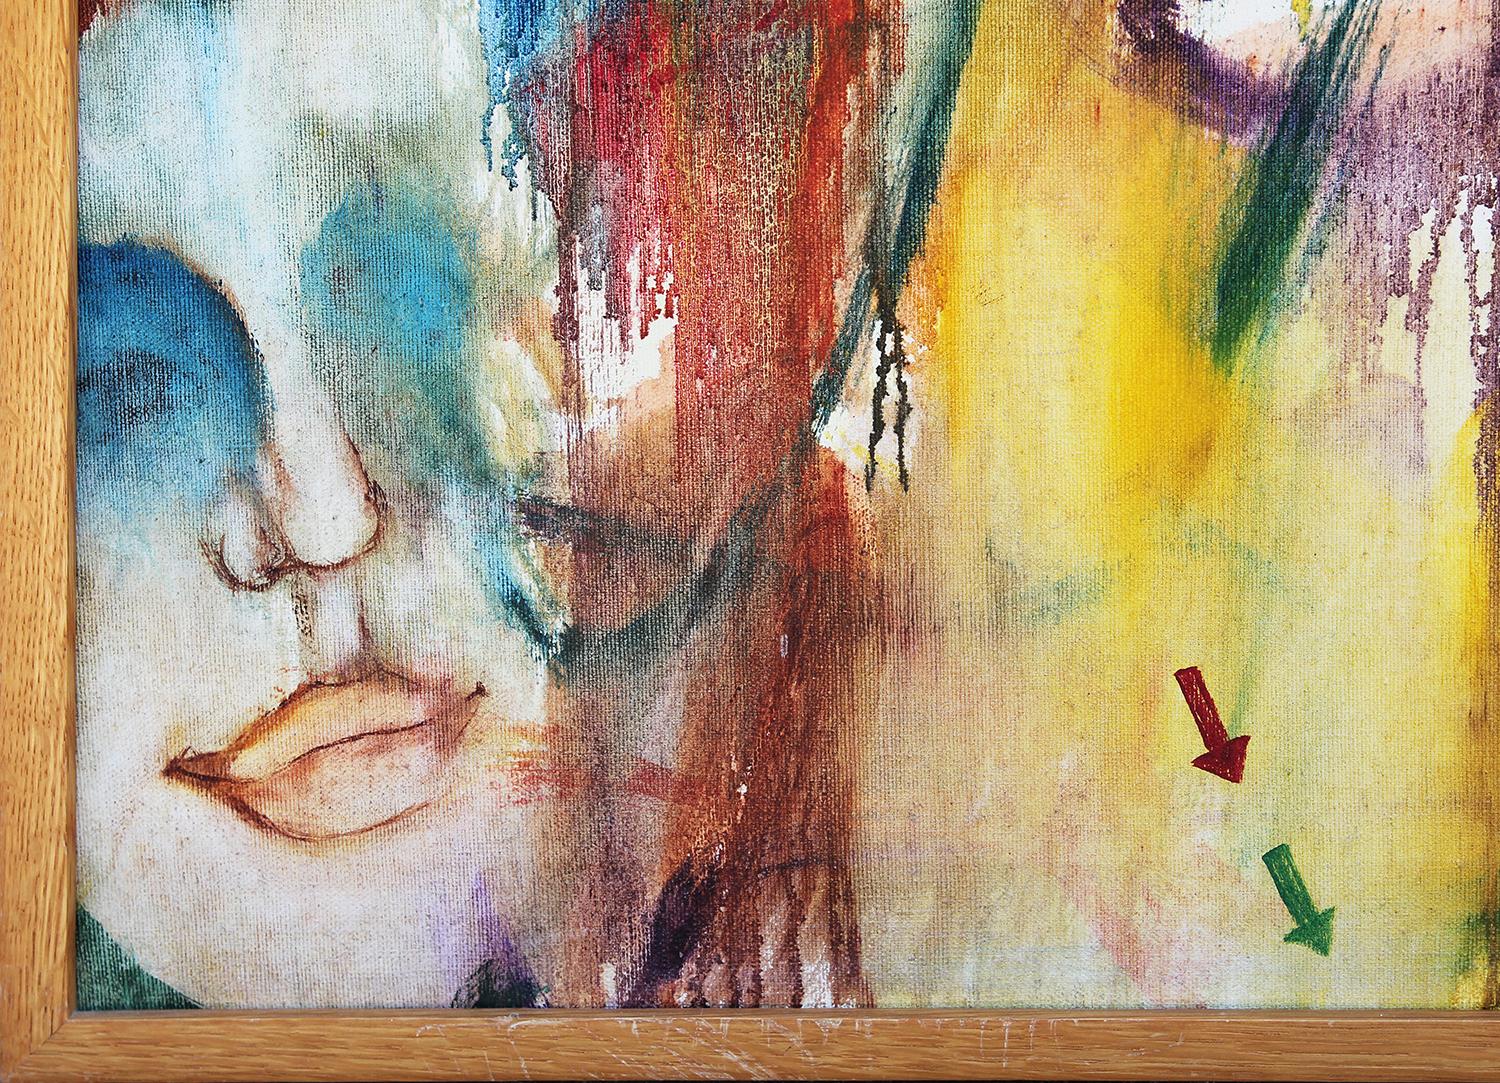 Modern colorful abstract painting by Texas artist Don Snell. The work features two central female figures with a third face entering from the lower left corner. In the right corner, a large bird sits in the foreground. Signed in front lower right